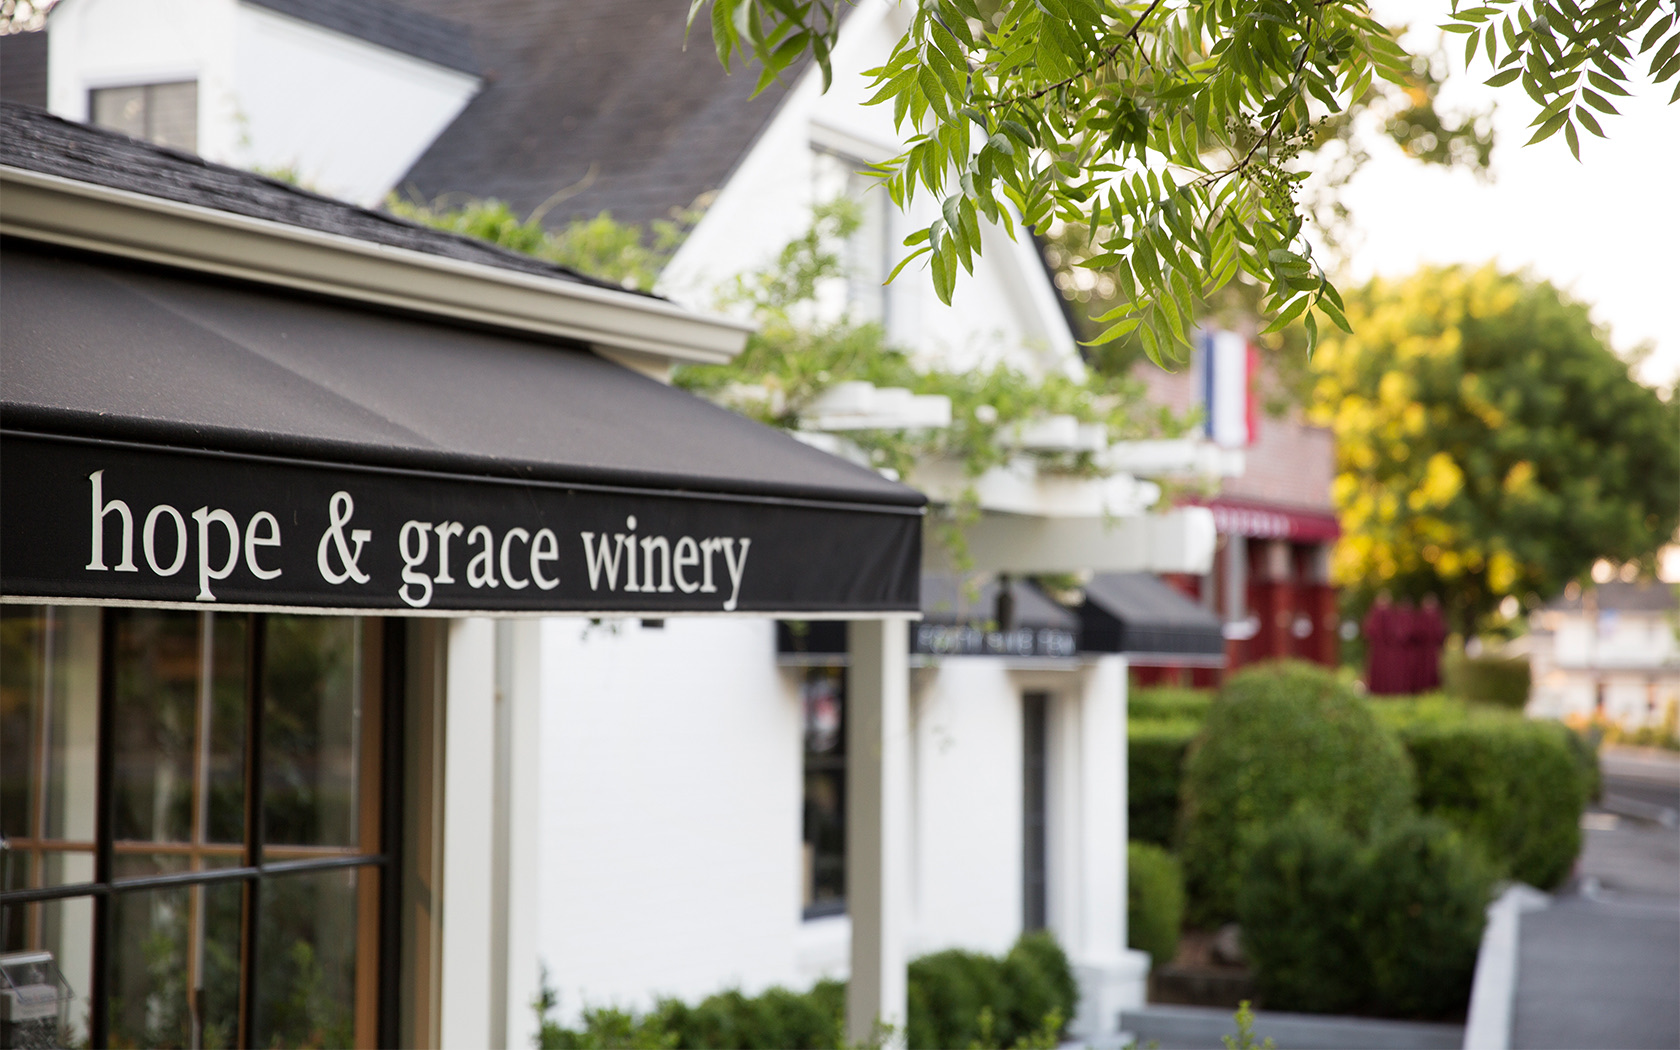 Facade of the hope & grace winery